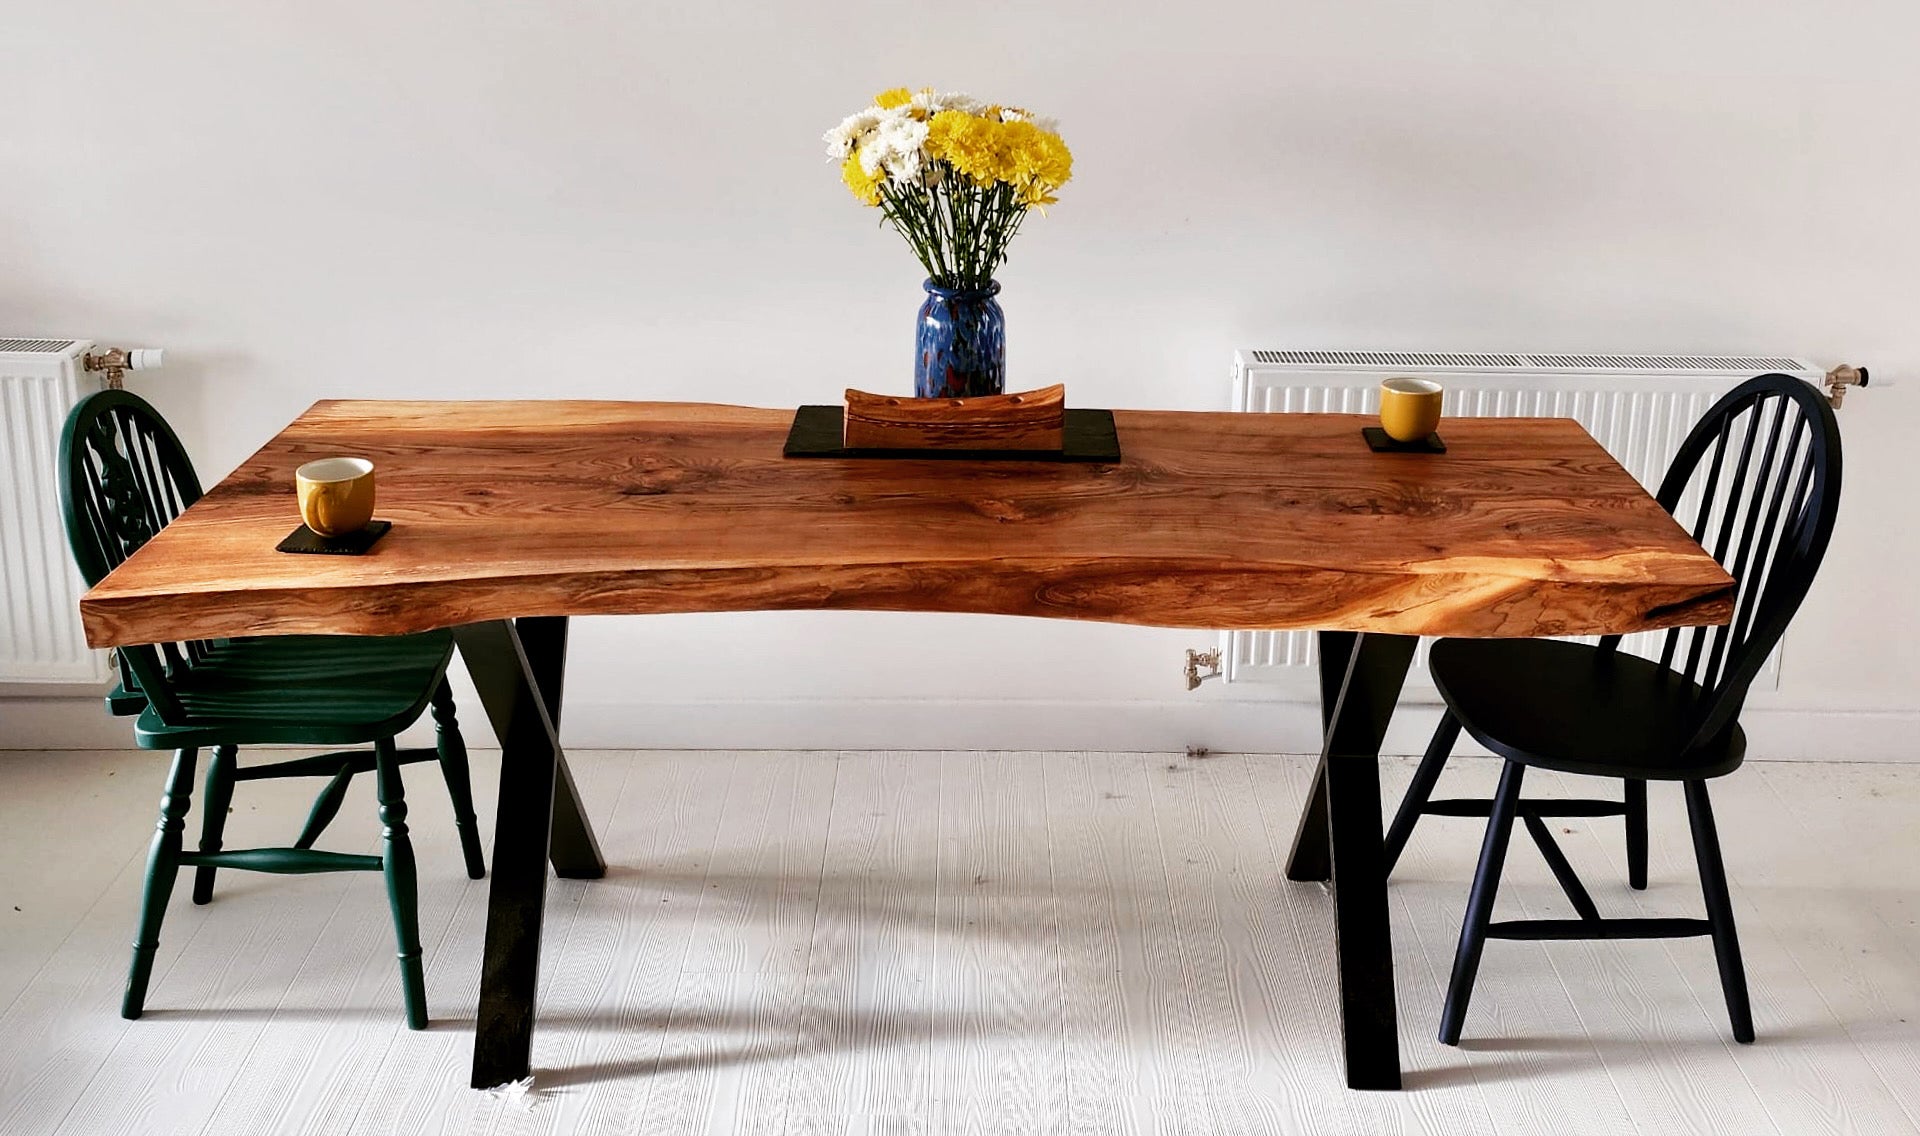 Commission 1. Handmade Live Edge Scottish Elm Dining Table with Metal X-frame legs